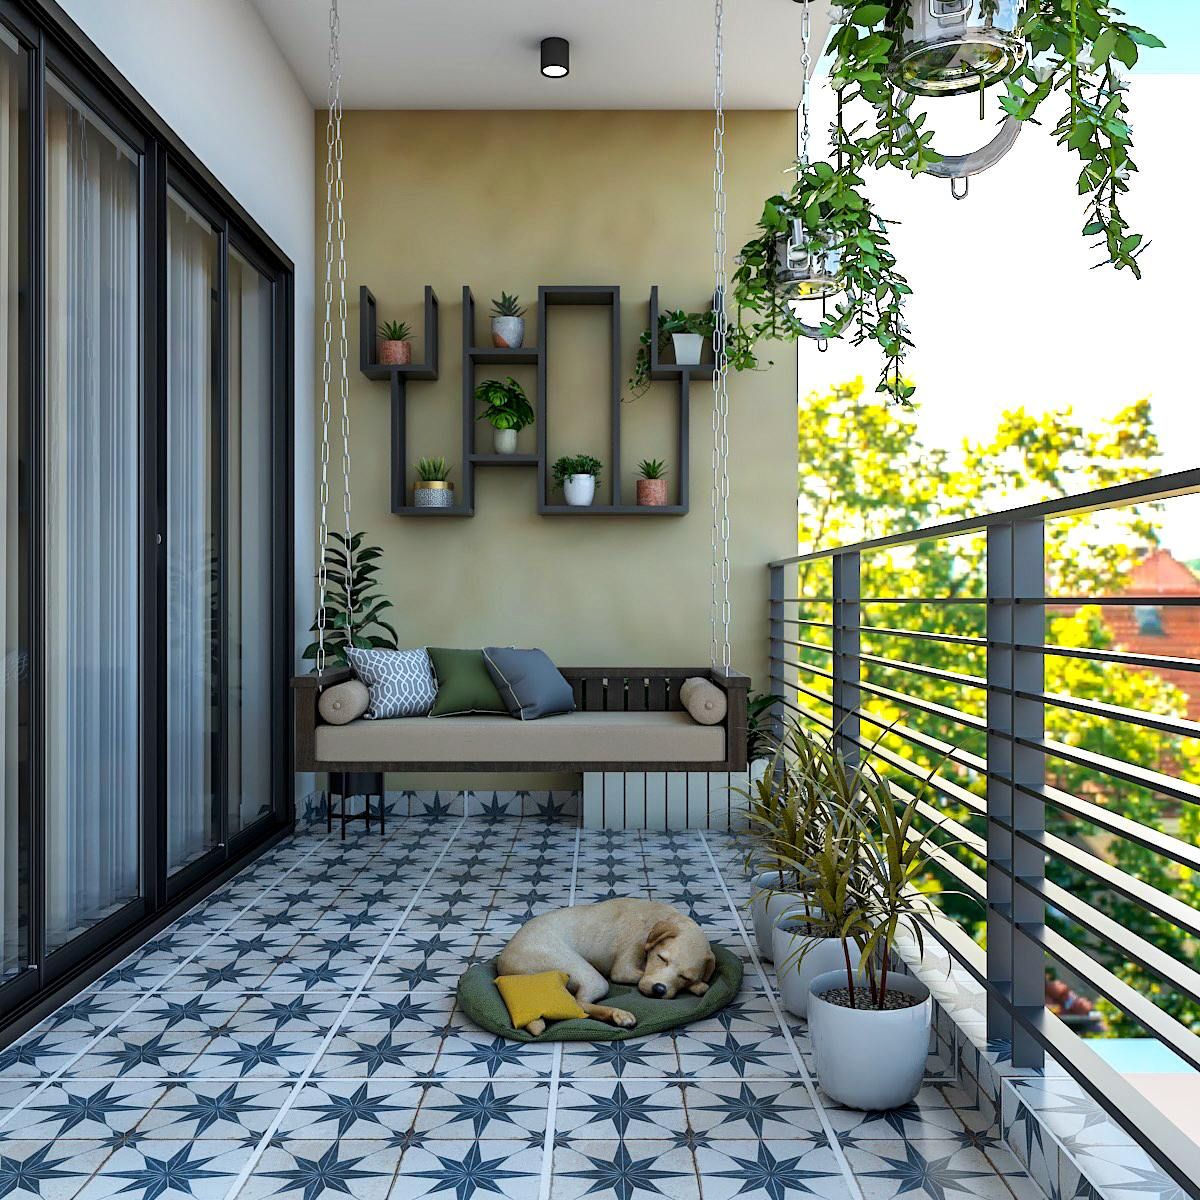 Modern Balcony Design With Blue And White Tiles